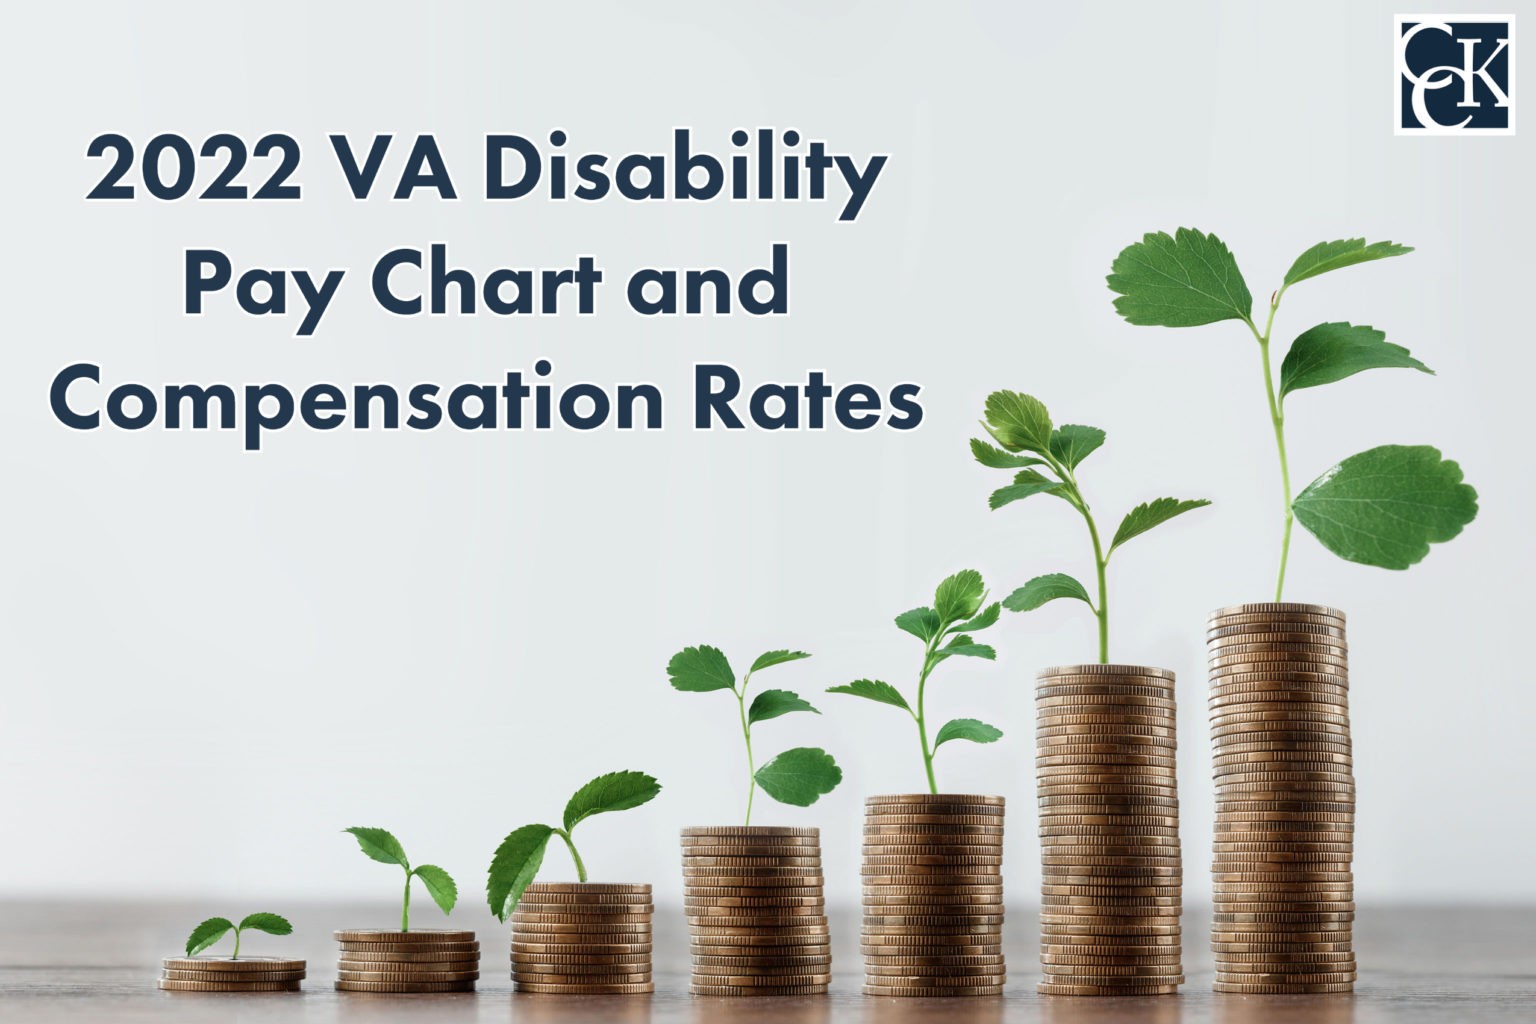 2022 VA Disability Pay Chart and Compensation Rates CostofLiving Adjustment CCK Law